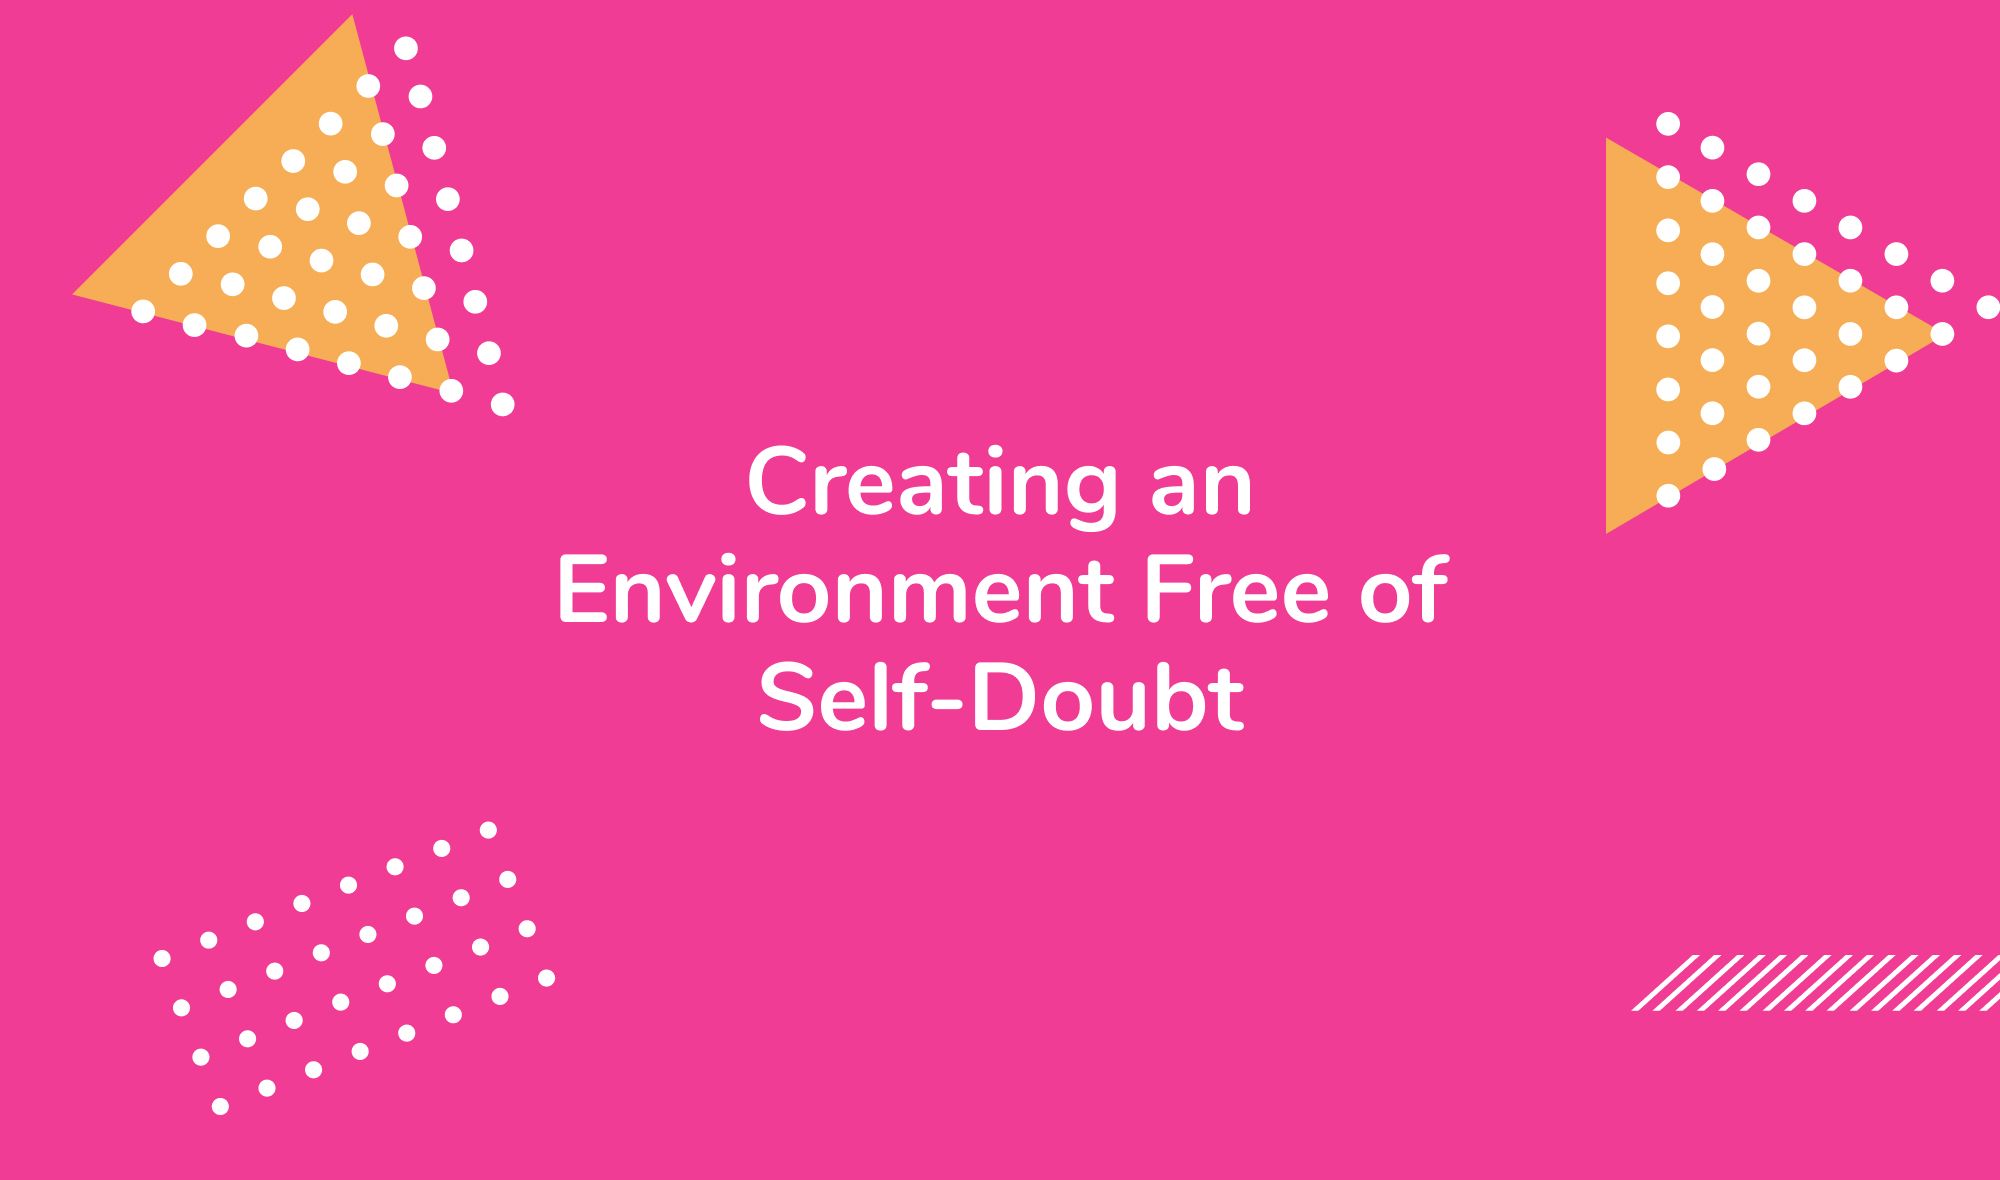 Creating an Environment Free of Self-Doubt